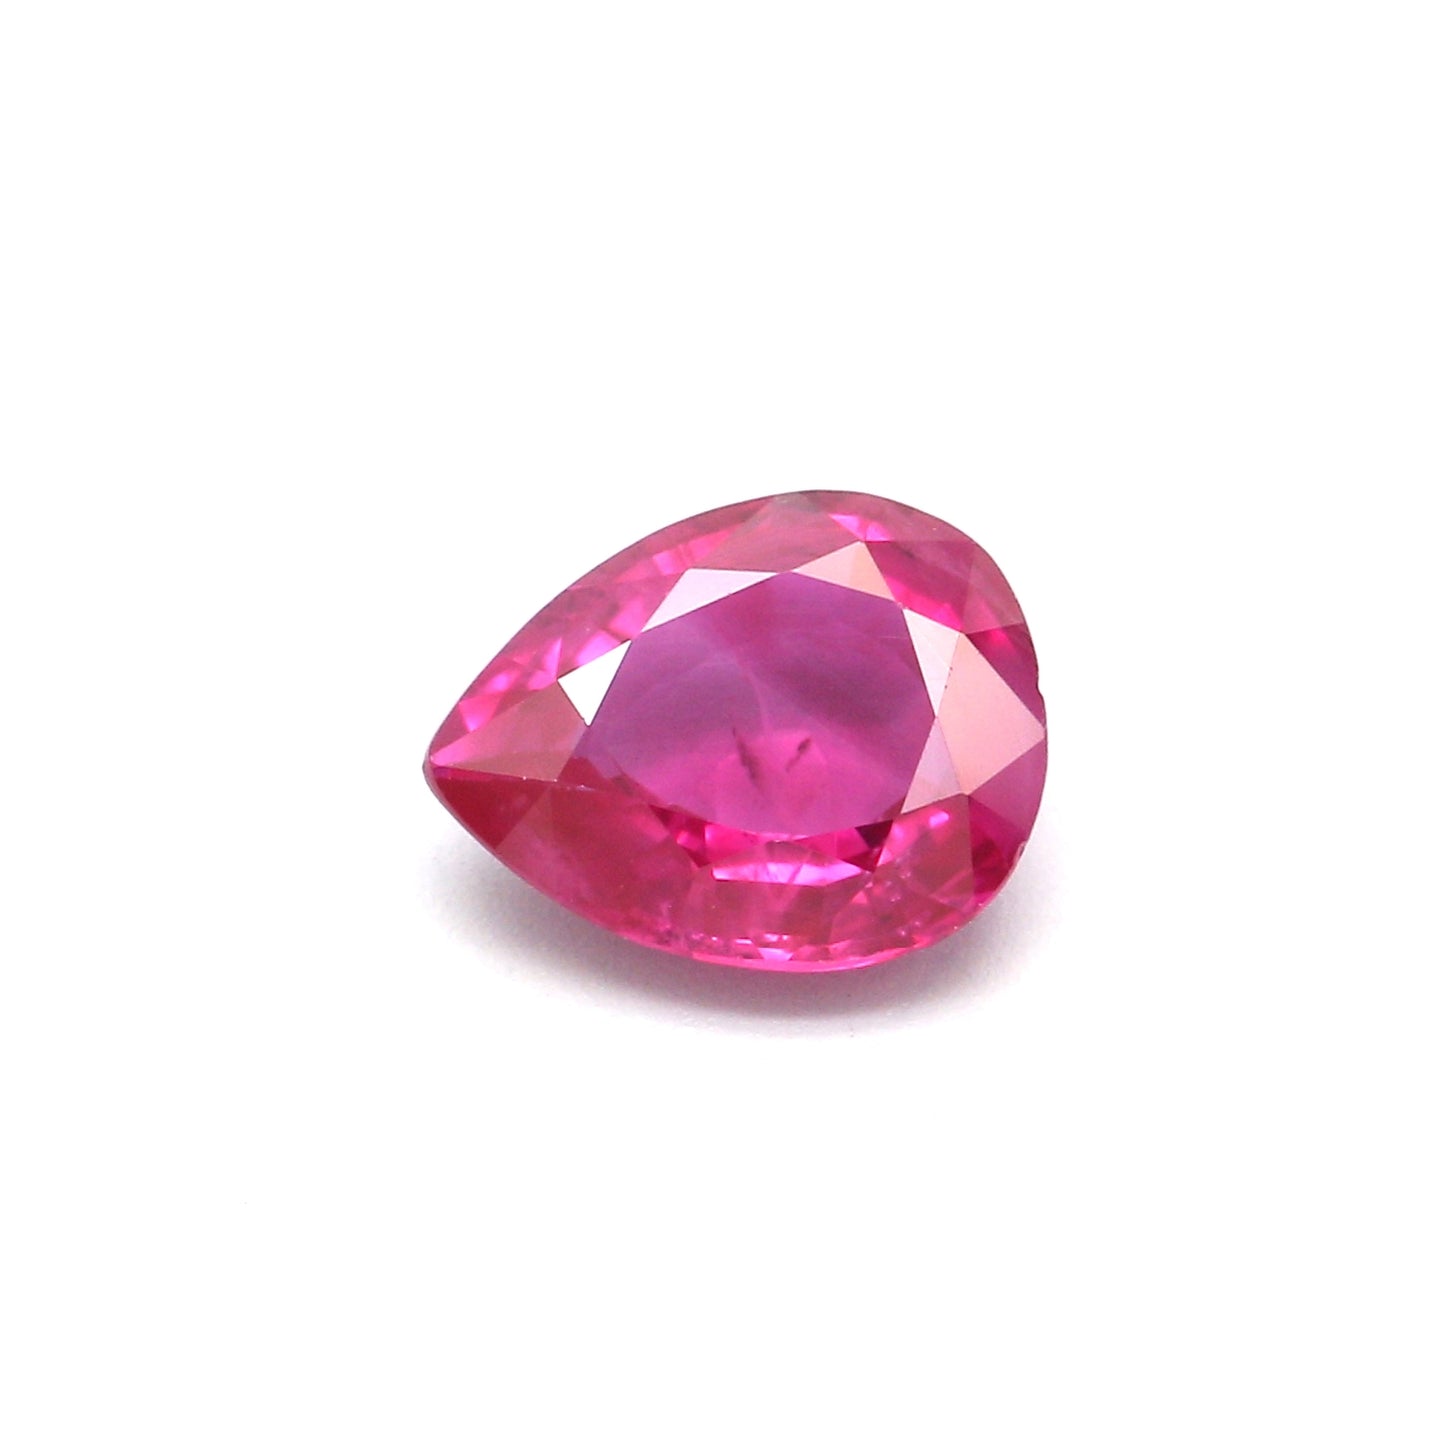 0.94ct Pinkish Red, Pear Shape Ruby, H(a), Myanmar - 6.85 x 5.43 x 2.85mm